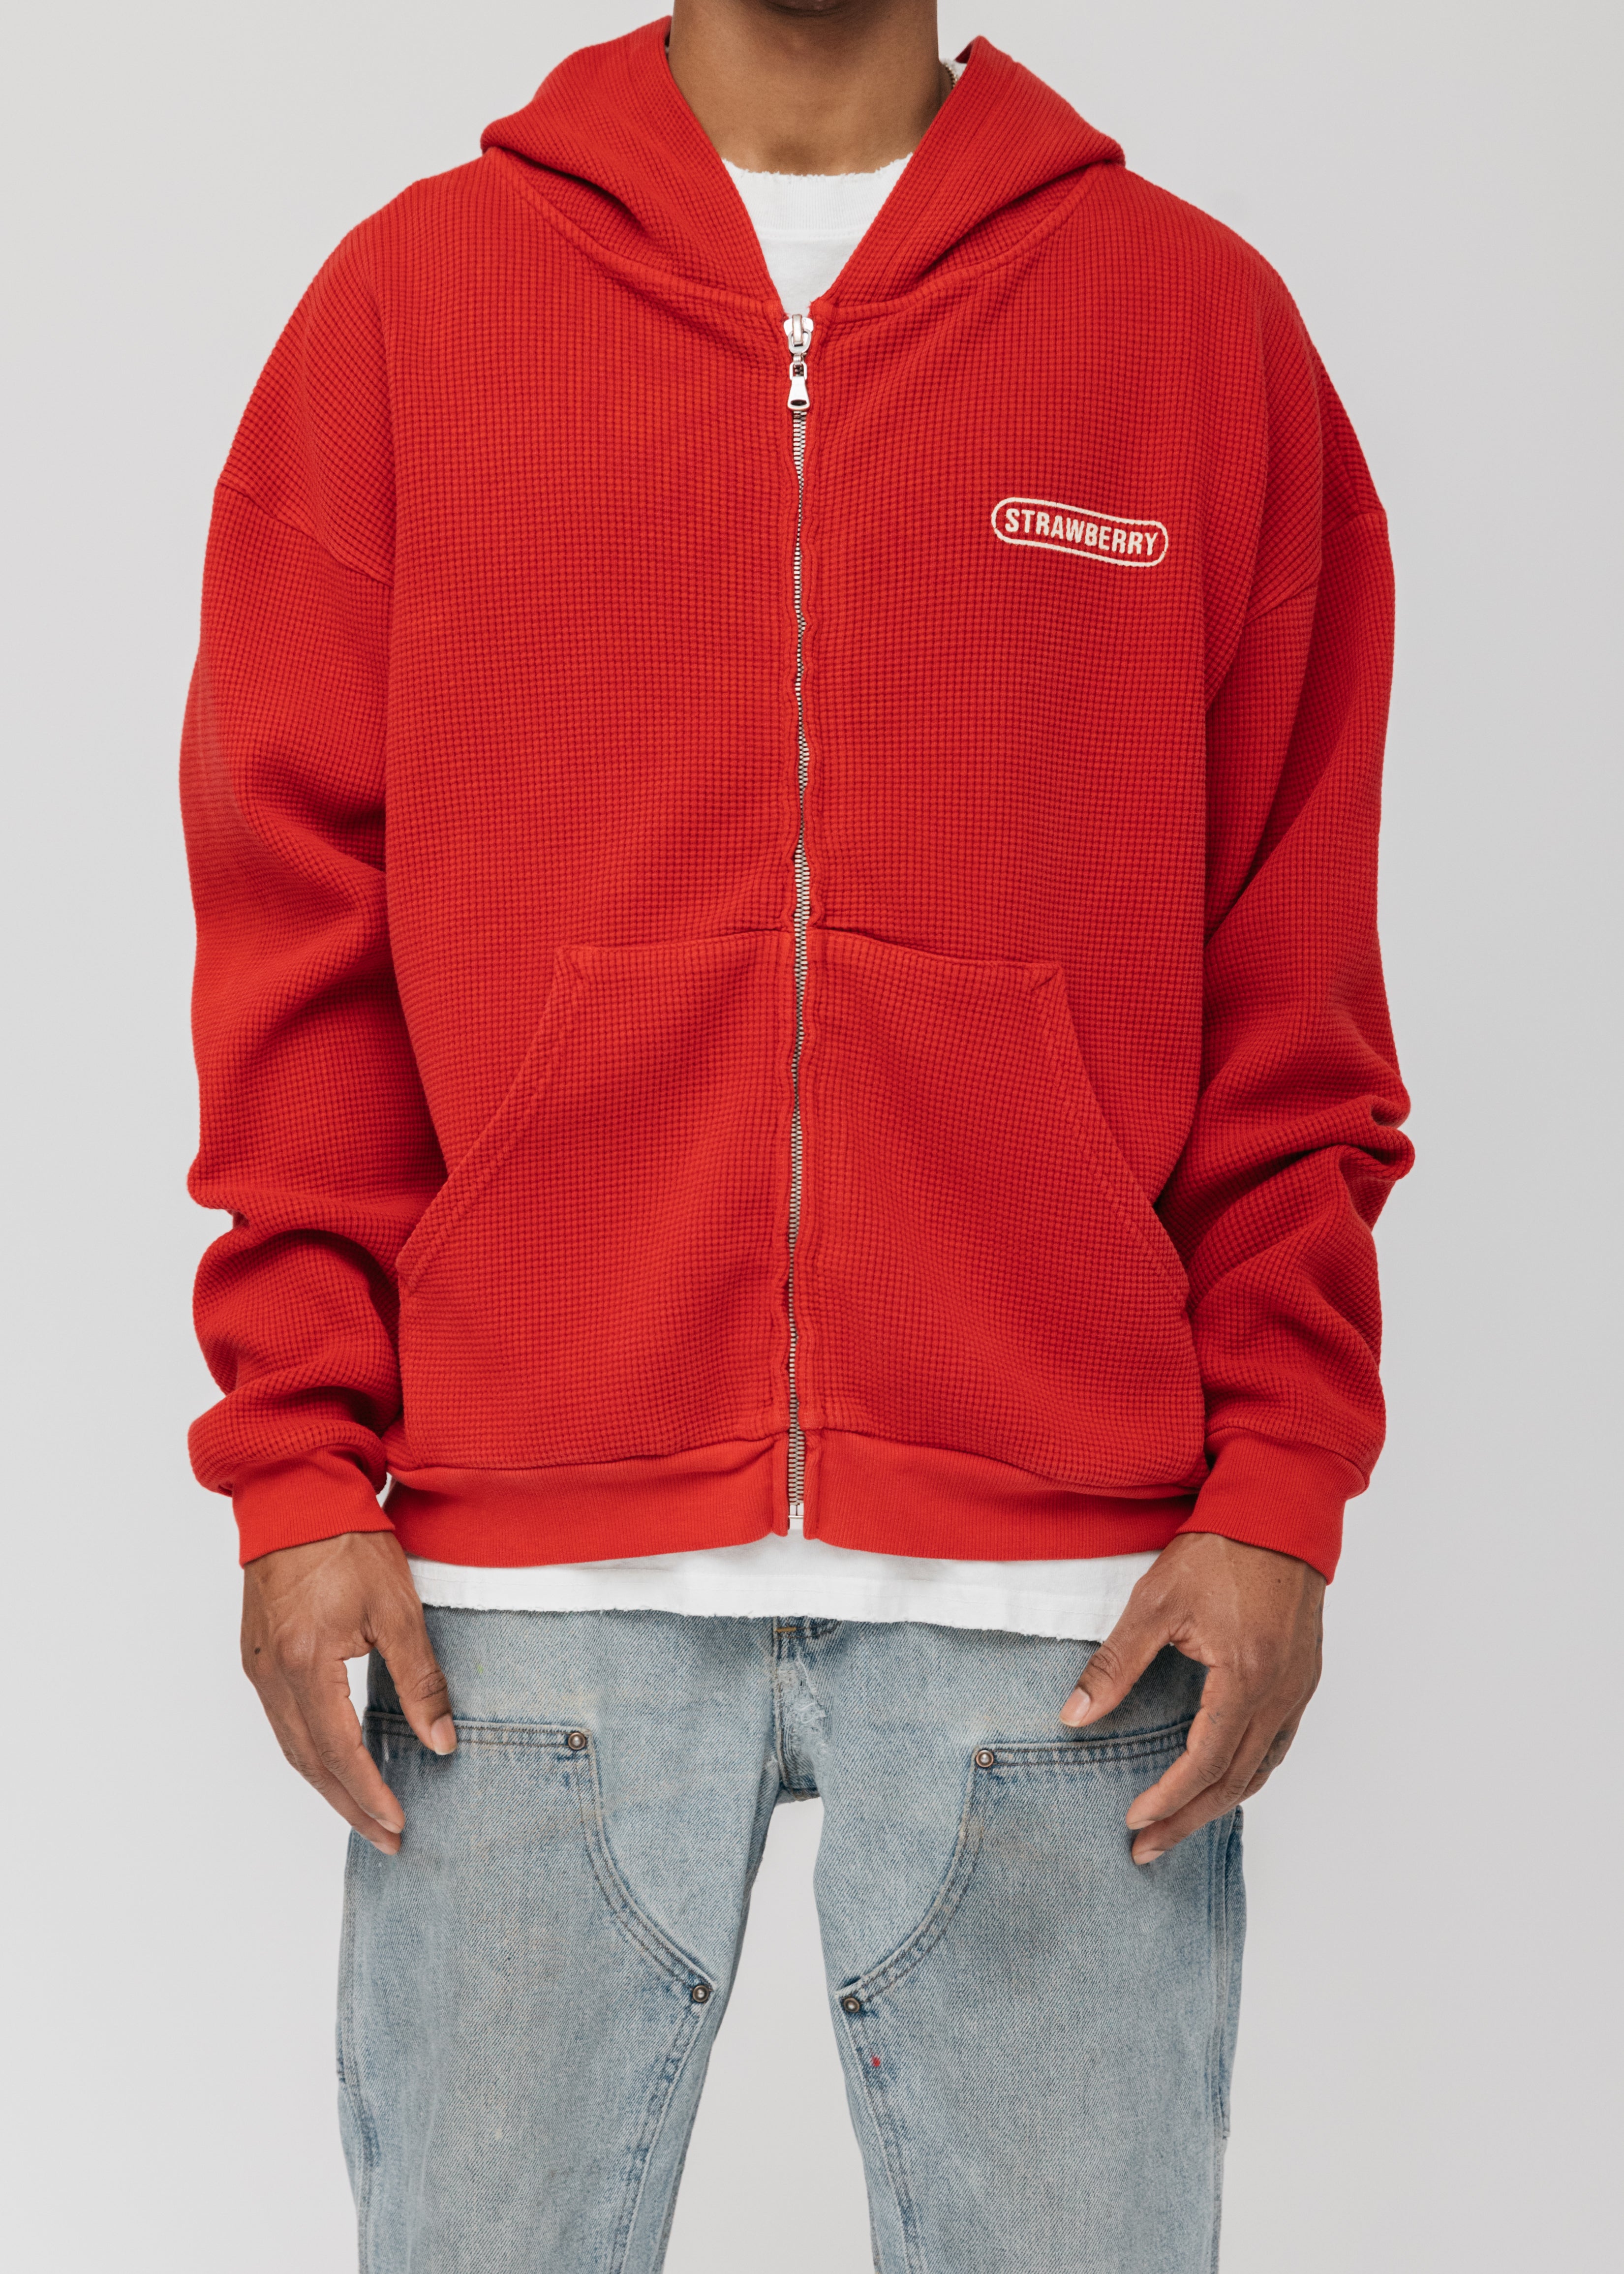 Heavyweight Thermal Zip Up - Red